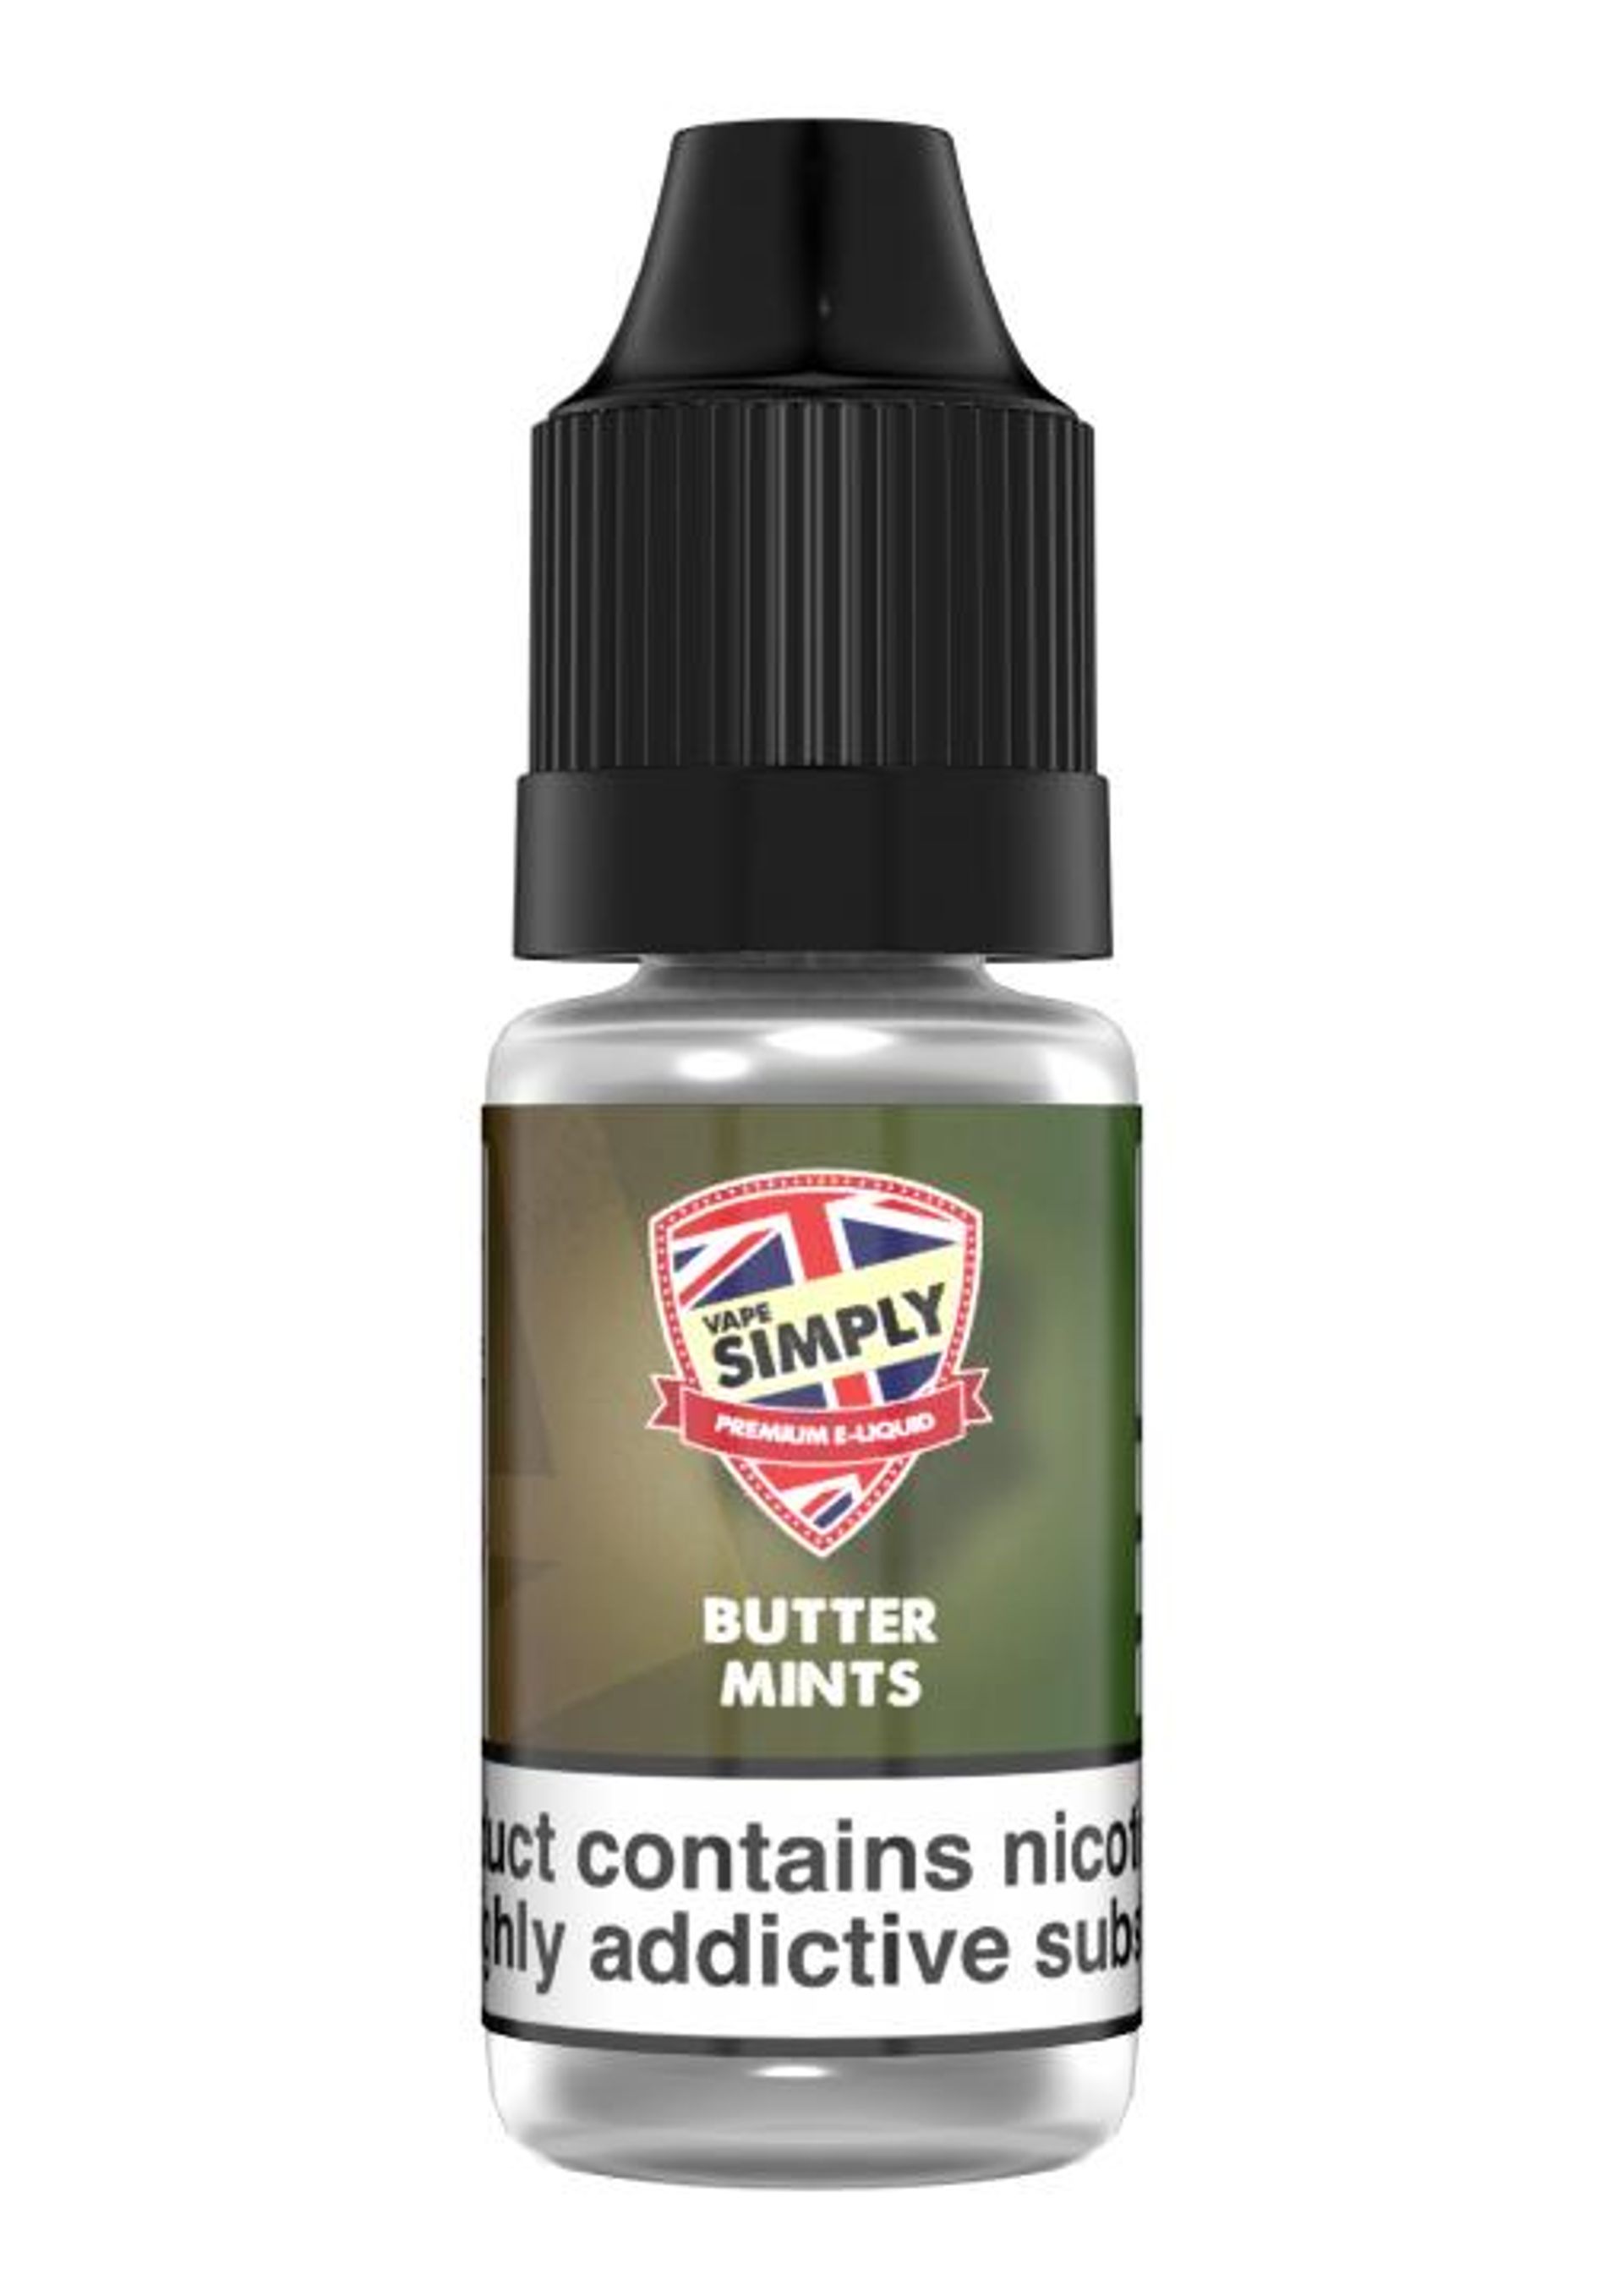 Image of Butter Mints by Vape Simply